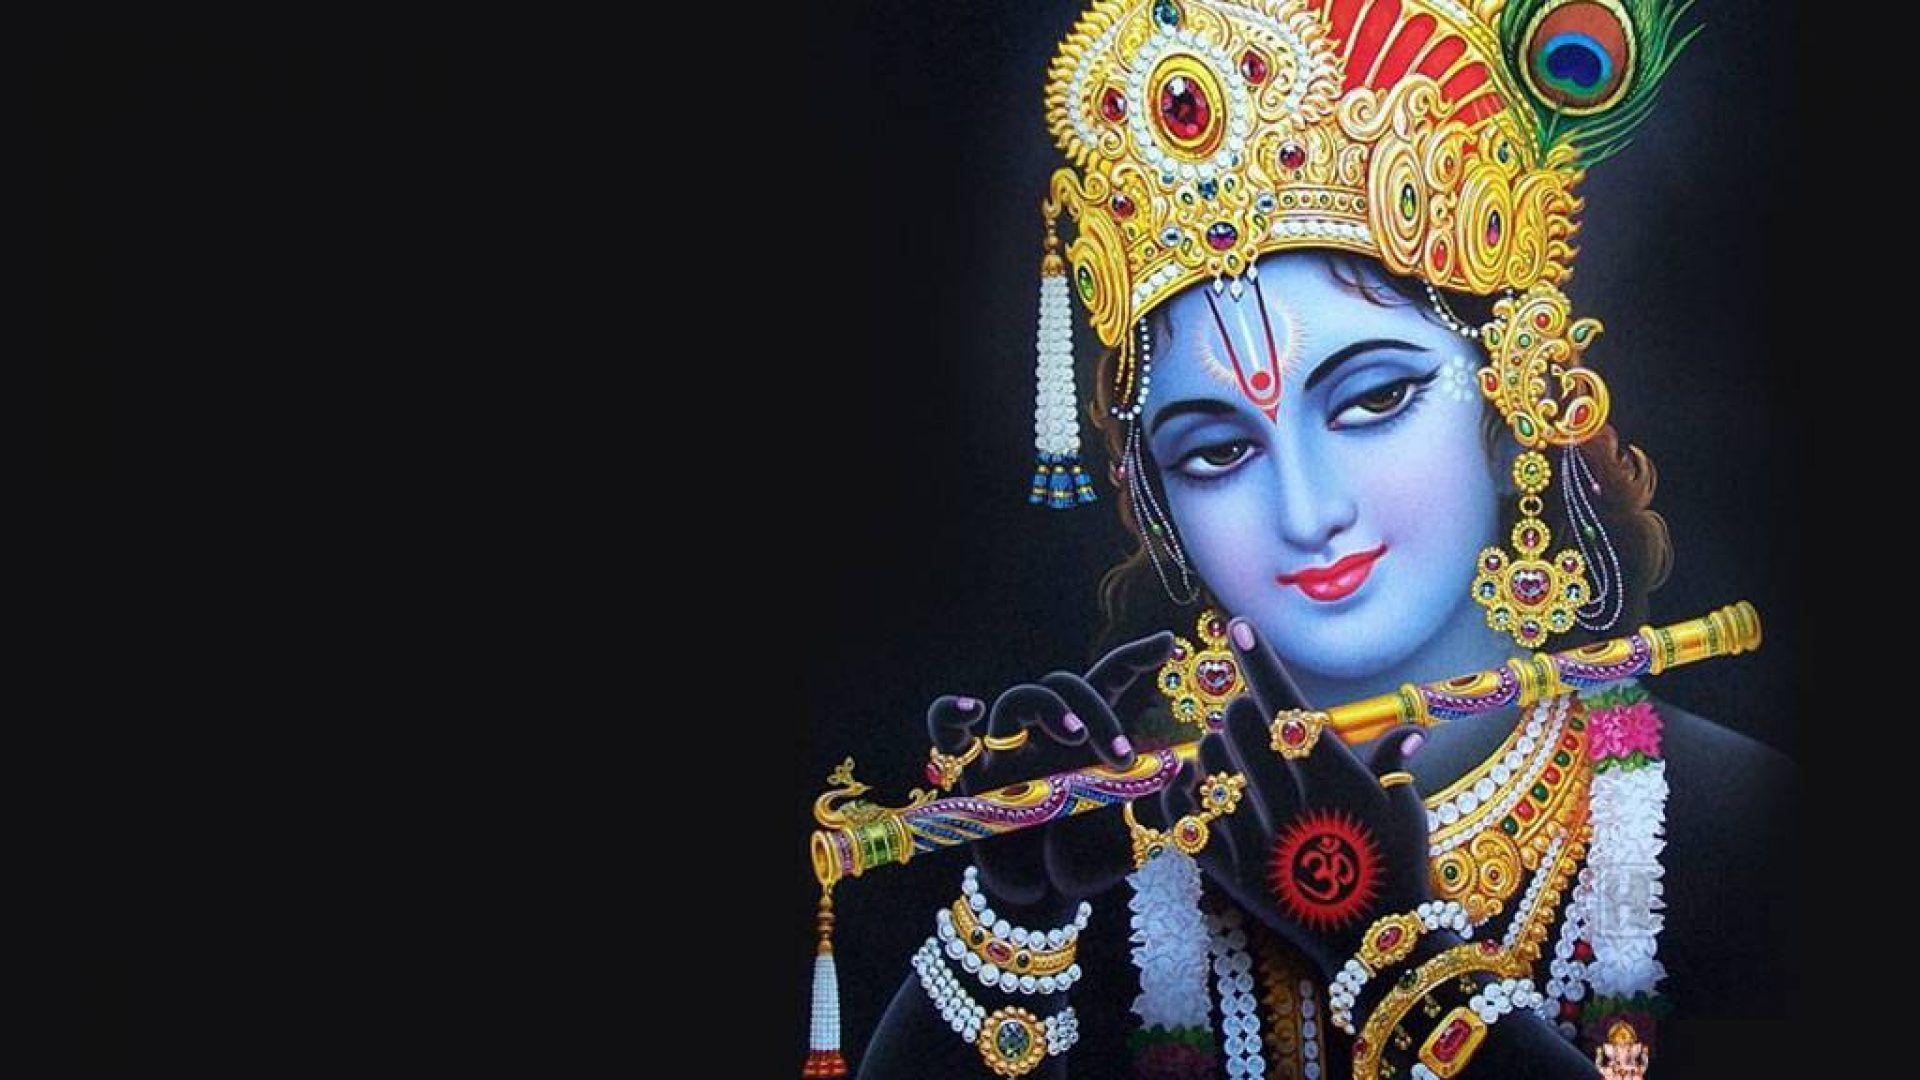 The Most Unique and Beautiful Collection of Krishna Image!